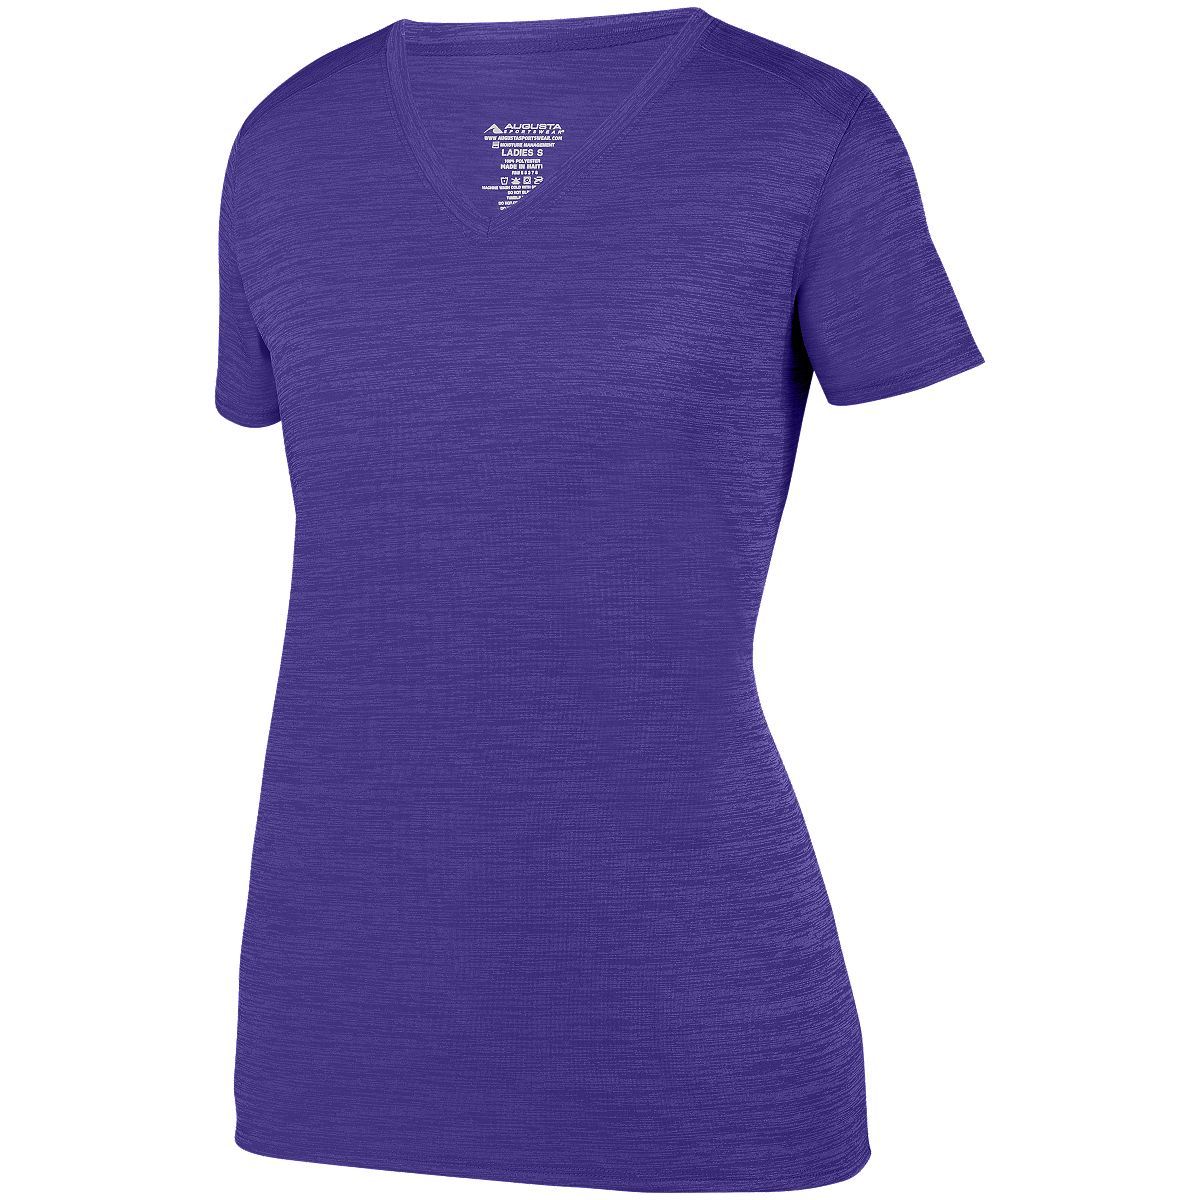 Augusta Sportswear Ladies Shadow Tonal Heather Training Tee in Purple  -Part of the Ladies, Ladies-Tee-Shirt, T-Shirts, Augusta-Products, Shirts, Tonal-Fleece-Collection product lines at KanaleyCreations.com